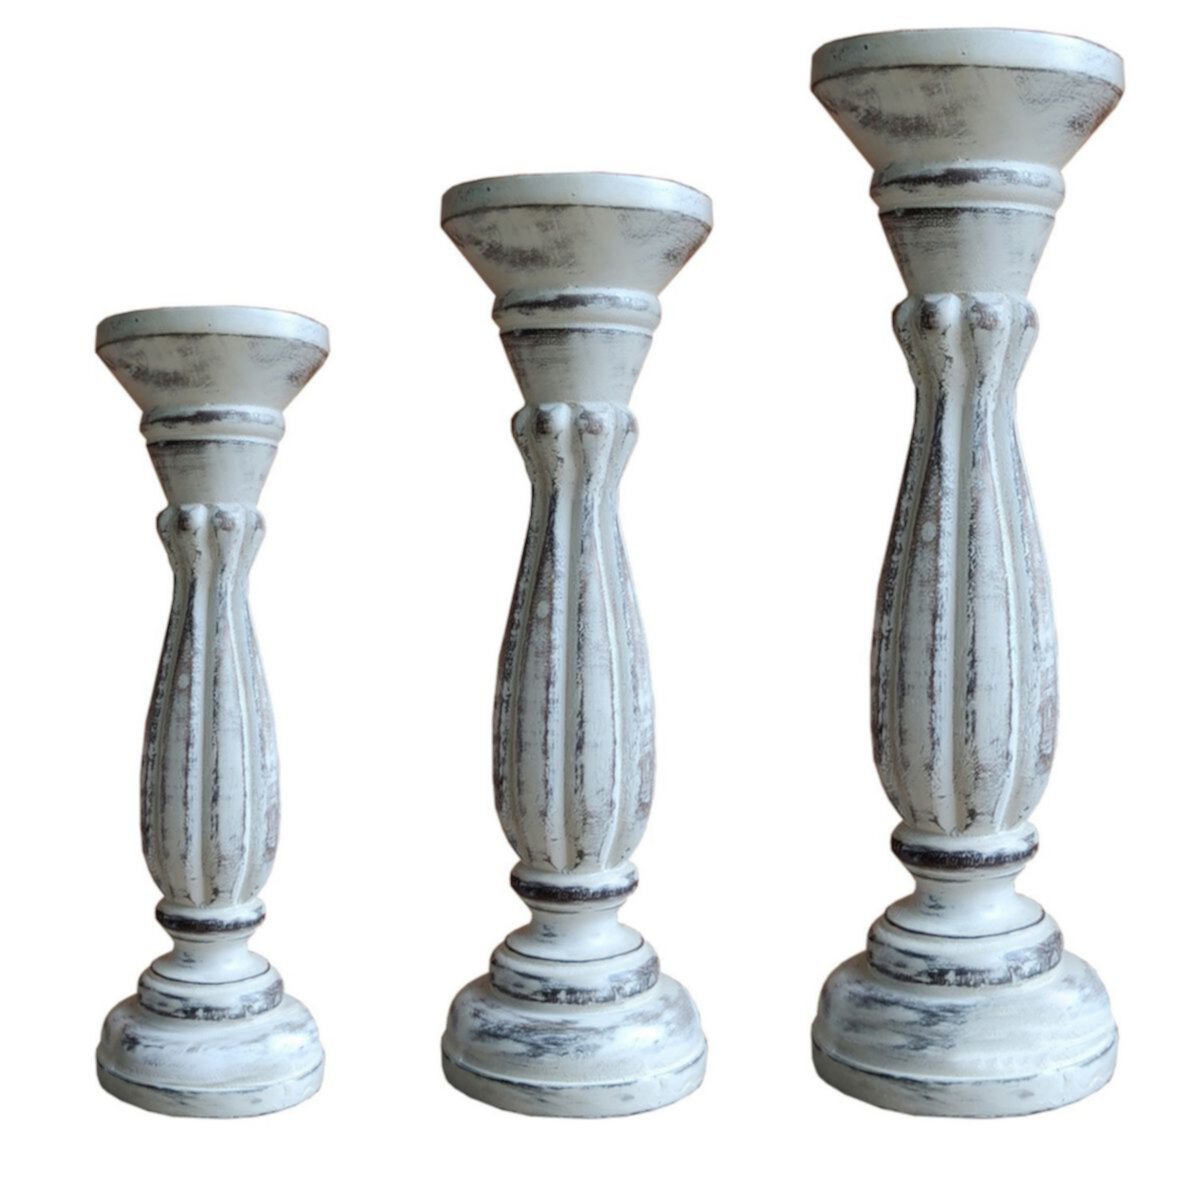 Taki Handmade Wooden Candle Holder With Pillar Base Support, Distressed White, Set Of 3 Benzara